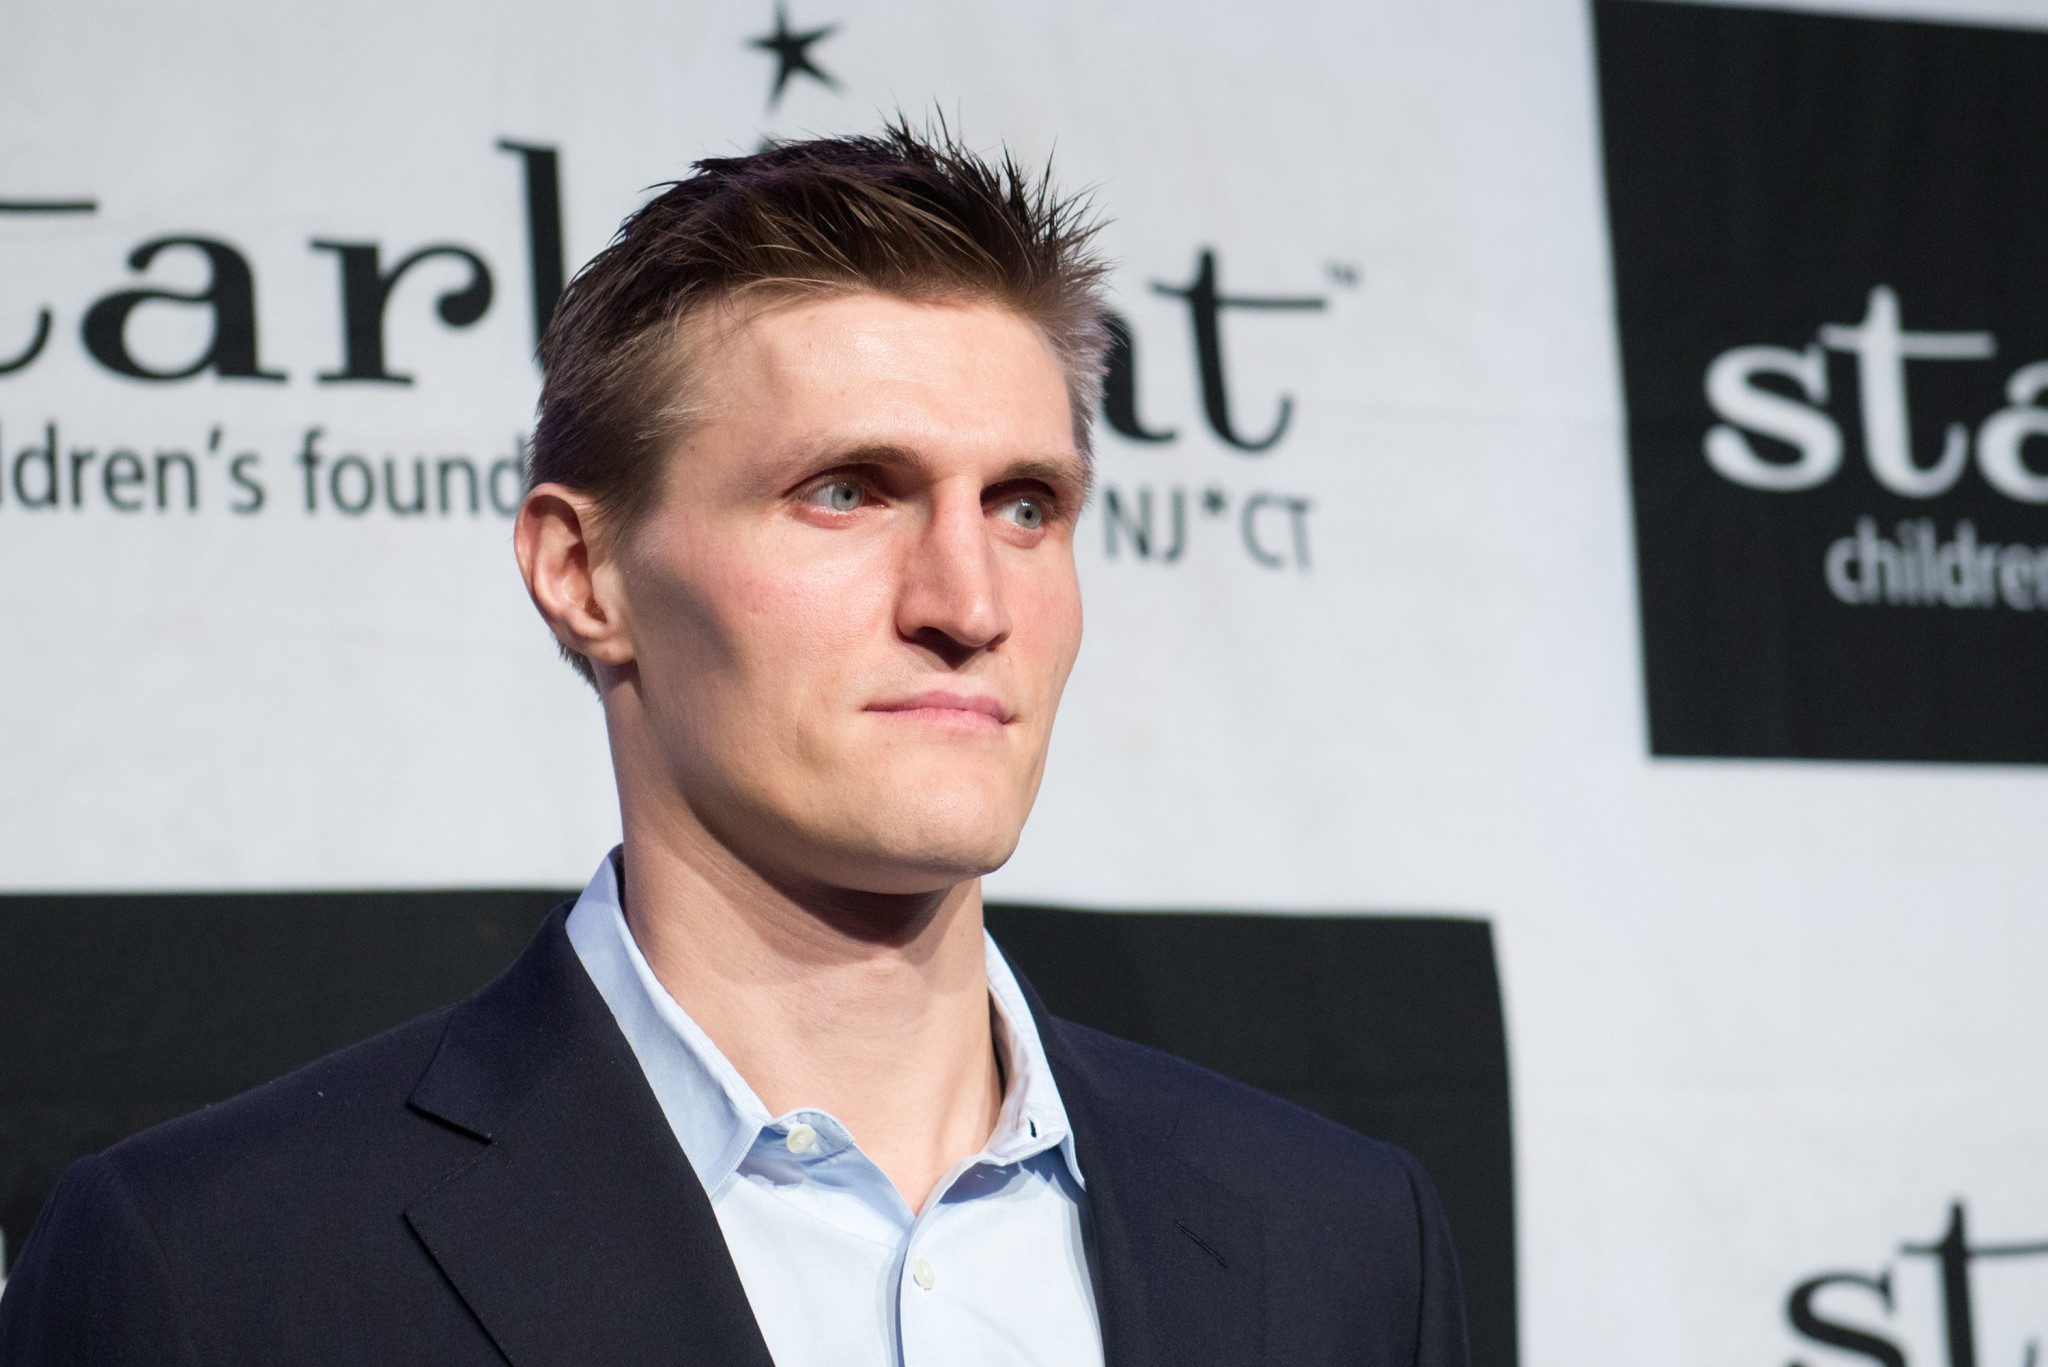 Russian Basketball Federation President Andrei Kirilenko said the 'negative attitude' towards Russian sport at the moment was the reason for Russia's withdrawal from the 2023 bidding process ©Getty Images